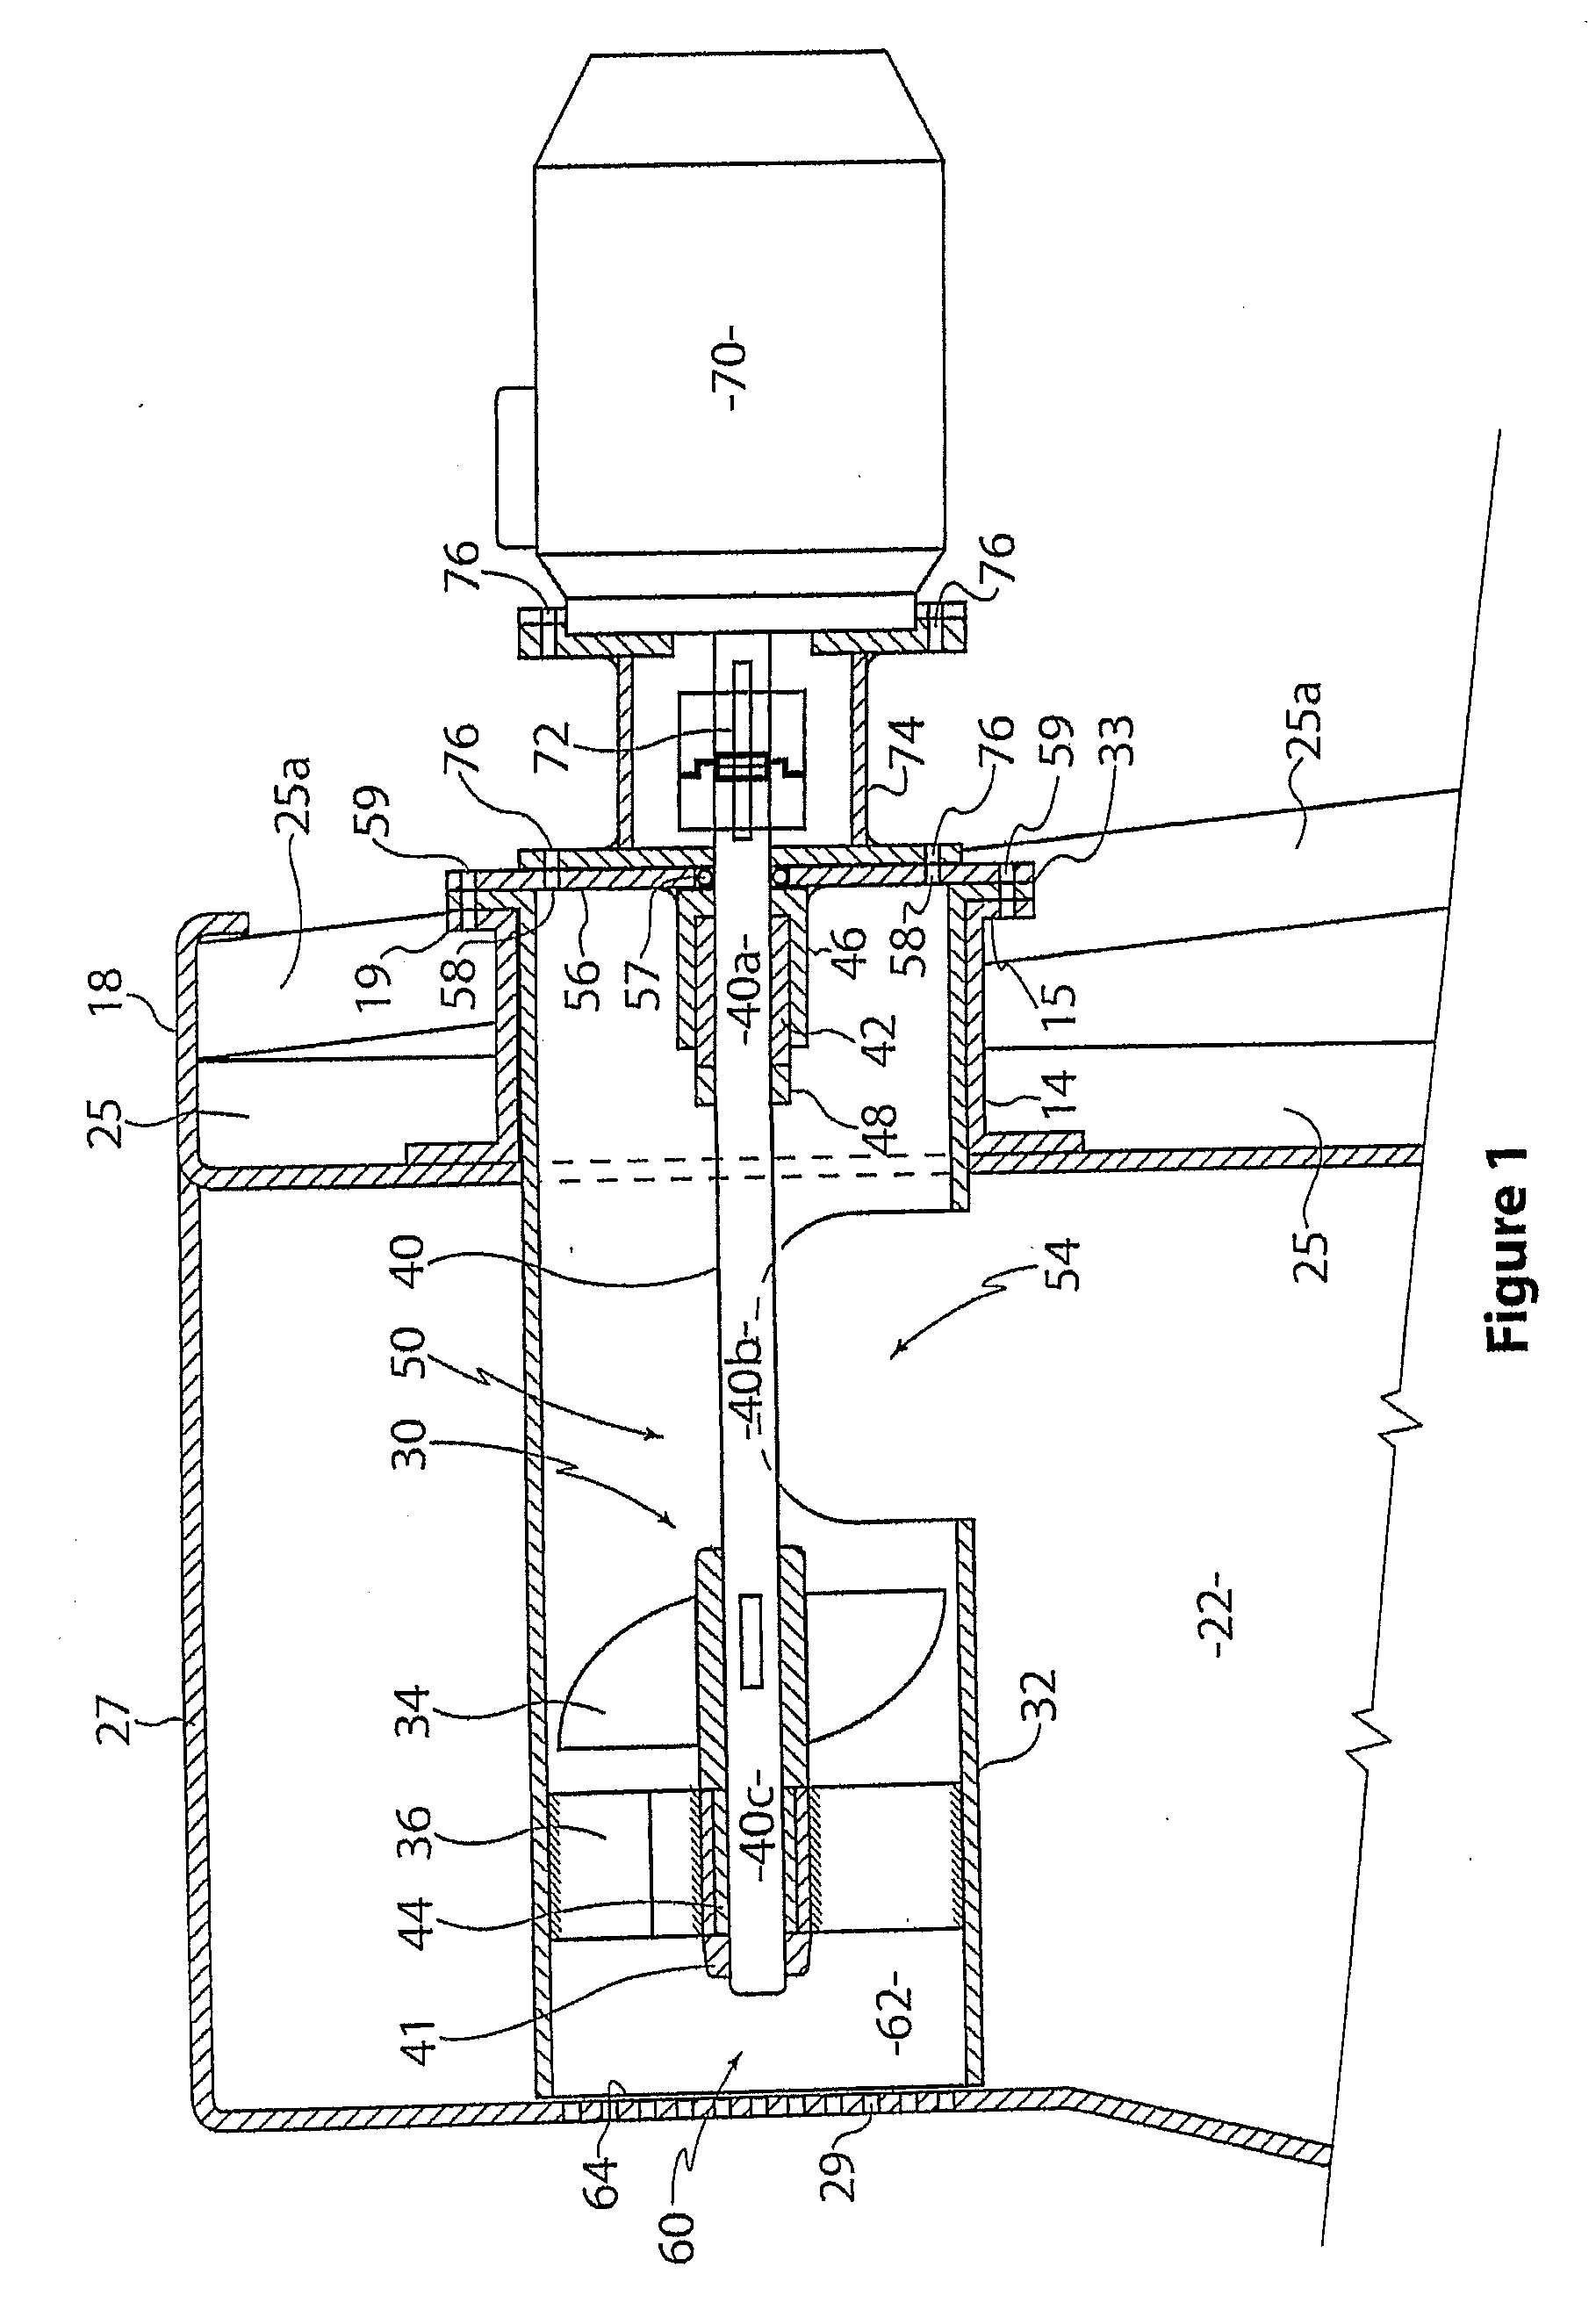 Apparatus for generating a current in a pool